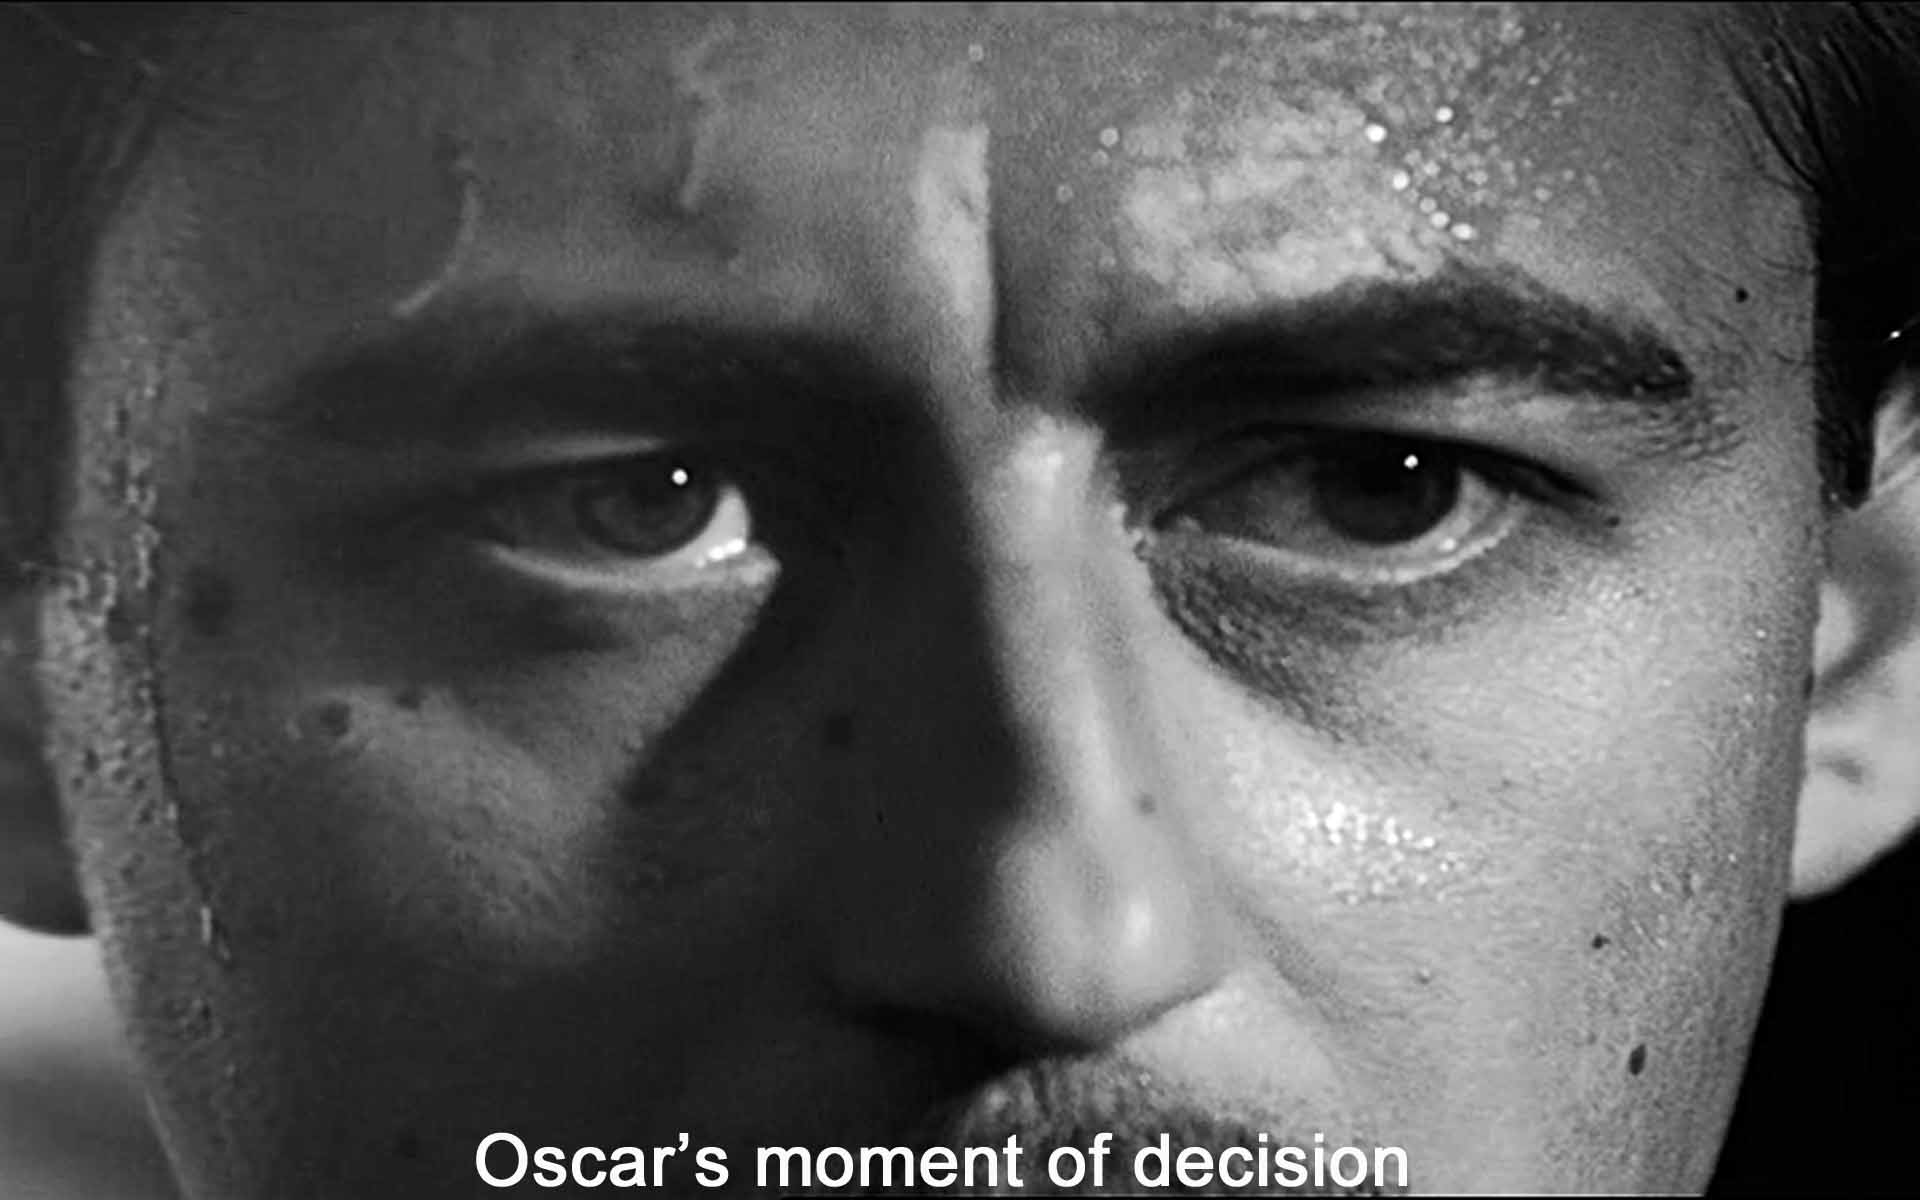 Oscar's moment of decision